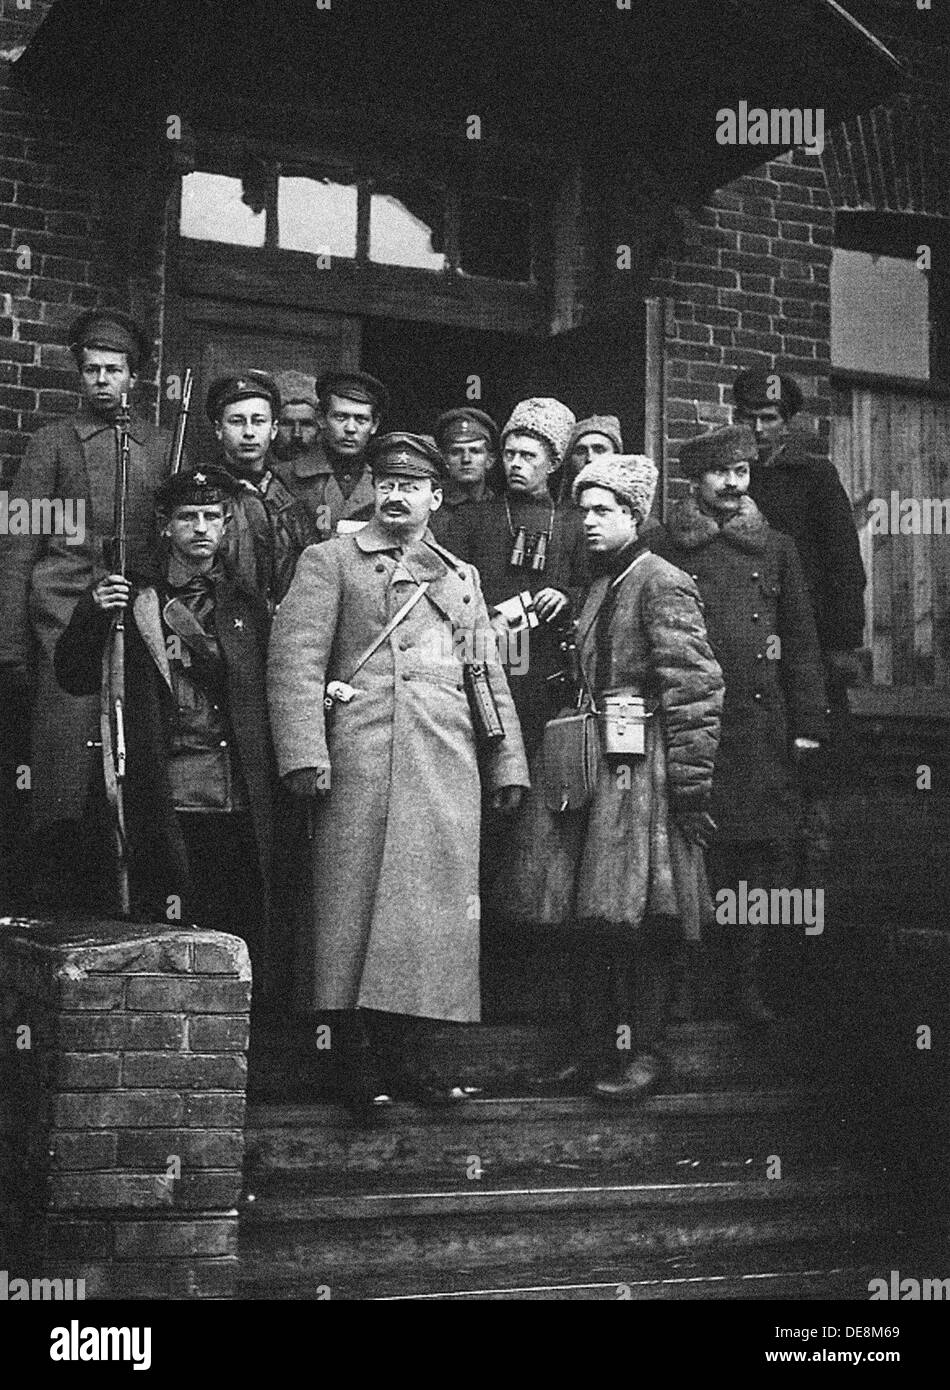 Leon Trotsky with his bodyguards, 1919. Stock Photo